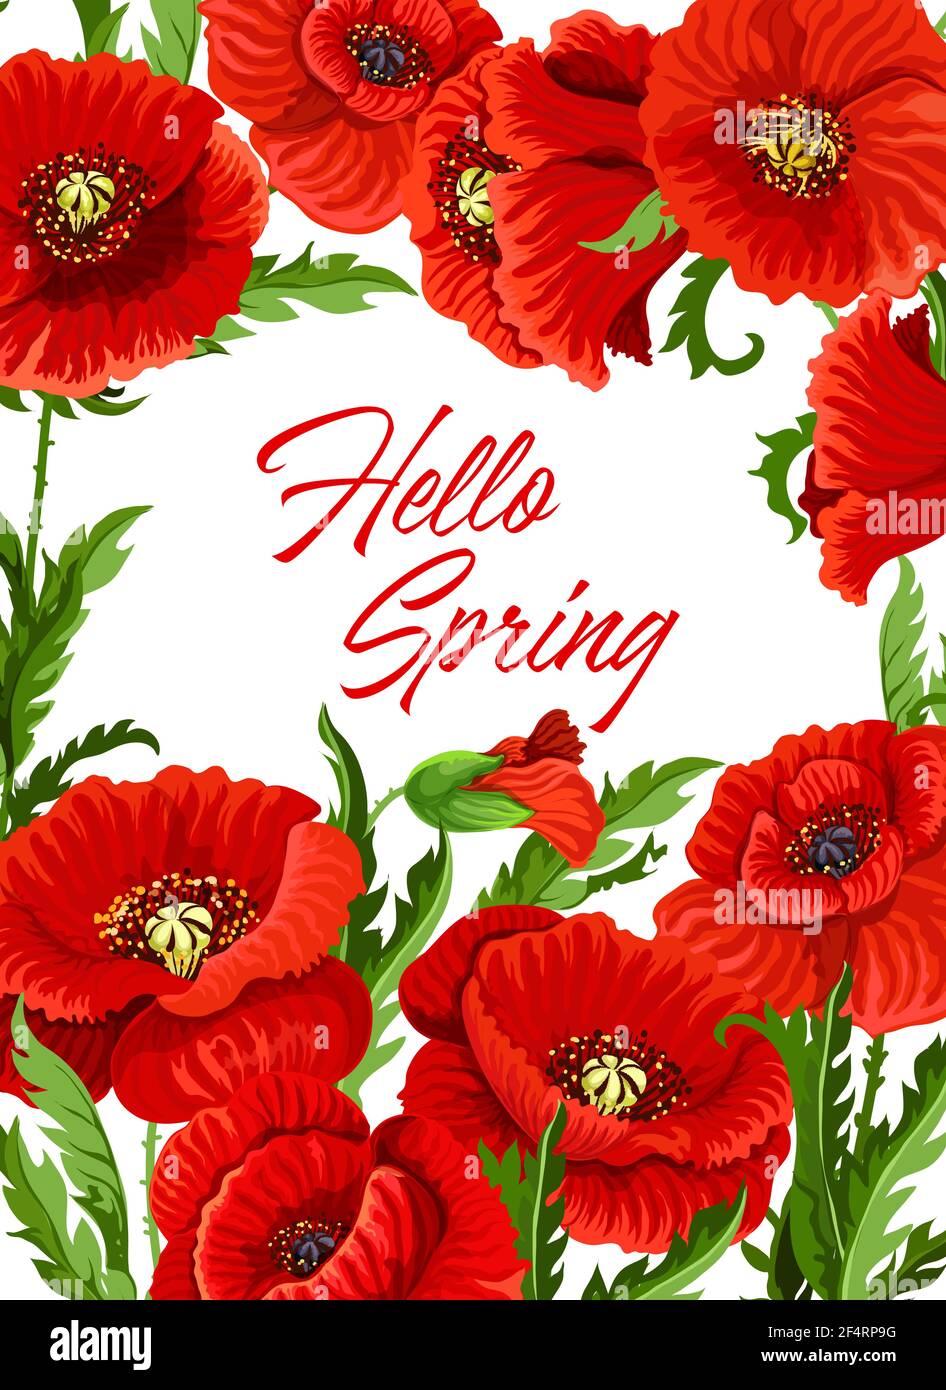 Spring season poster with red poppy flowers, leaves and buds. Floral background or holiday frame with blooming common poppy and lettering. Flowering p Stock Vector